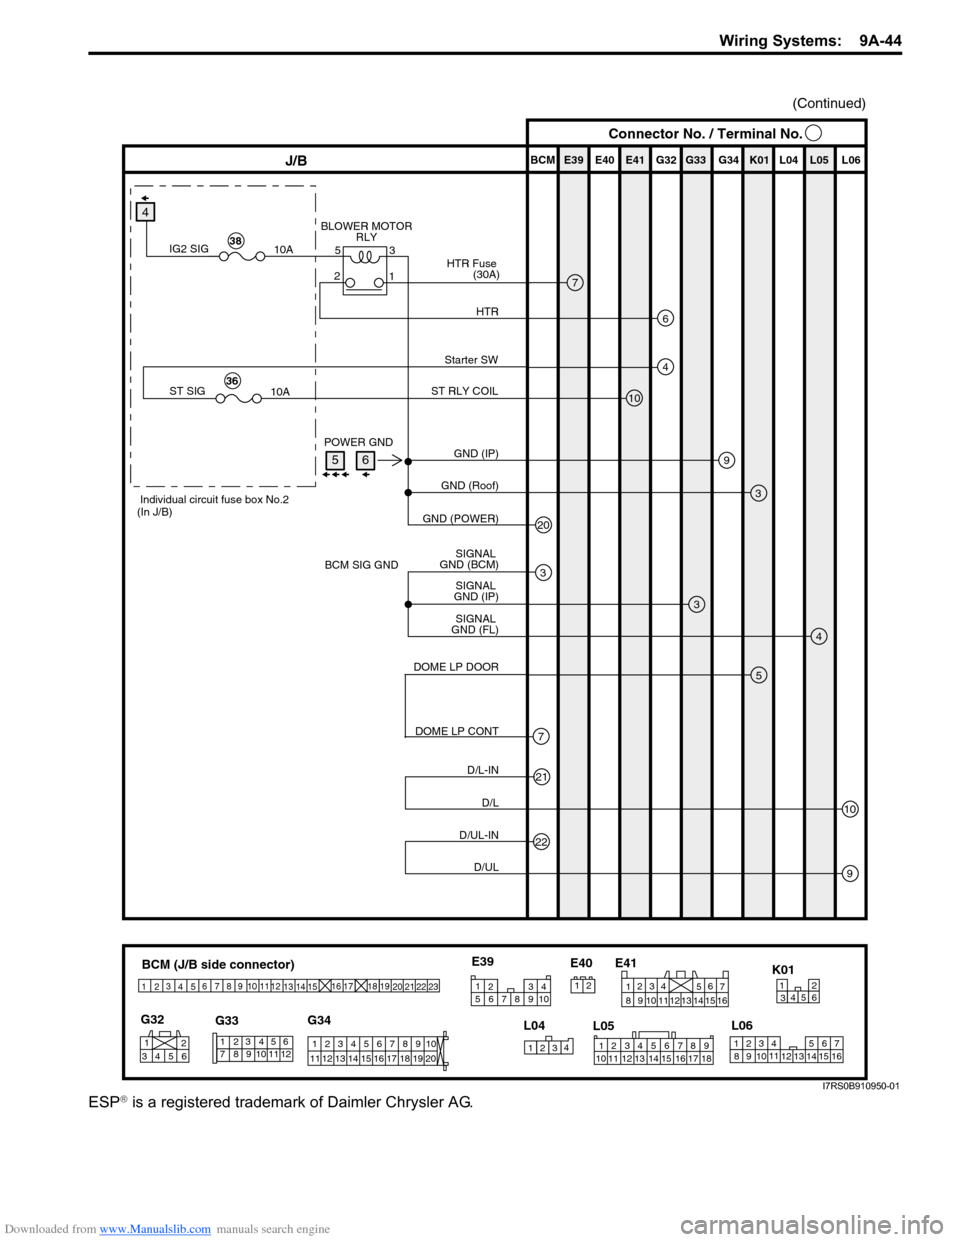 SUZUKI SWIFT 2006 2.G Service User Guide Downloaded from www.Manualslib.com manuals search engine Wiring Systems:  9A-44
ESP® is a registered trademark of Daimler Chrysler AG.
BCM (J/B side connector)
34
1
2 5
15
14
12
13
10
11
9
8
6
7
17
1